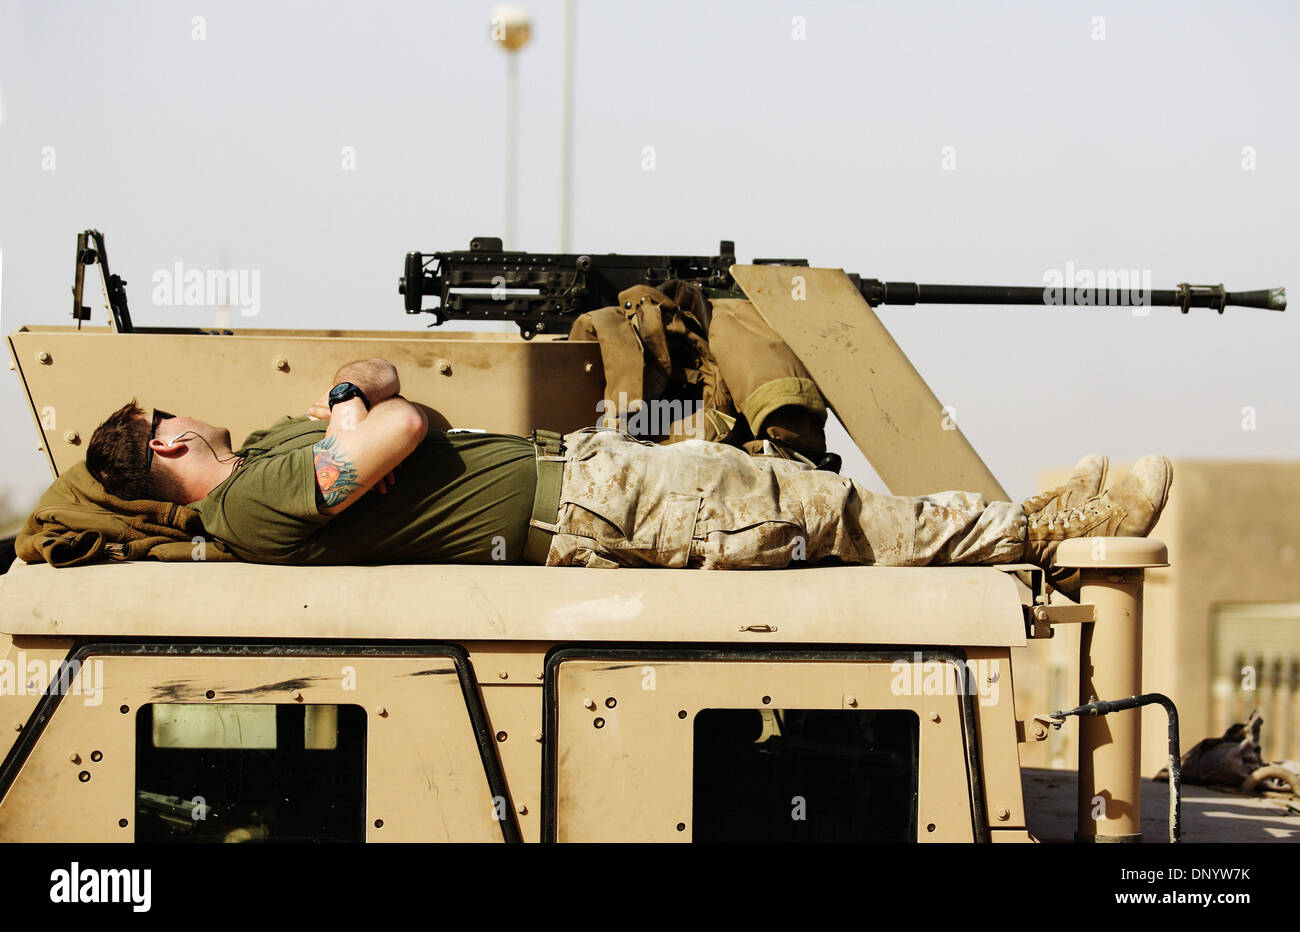 Feb 11, 2006; Al-Falujah, Anbar, IRAQ; A marine from Weapons company 2nd marine division, 2nd battalion, 6th marine regiment, RCT-8, 4th platoon takes a nap on the top of his Humvee between patrols of the Iraqi city of Al-Falujah. Mandatory Credit: Photo by Toby Morris/Toby Morris Photo. (©) Copyright 2006 by Toby Morris Stock Photo